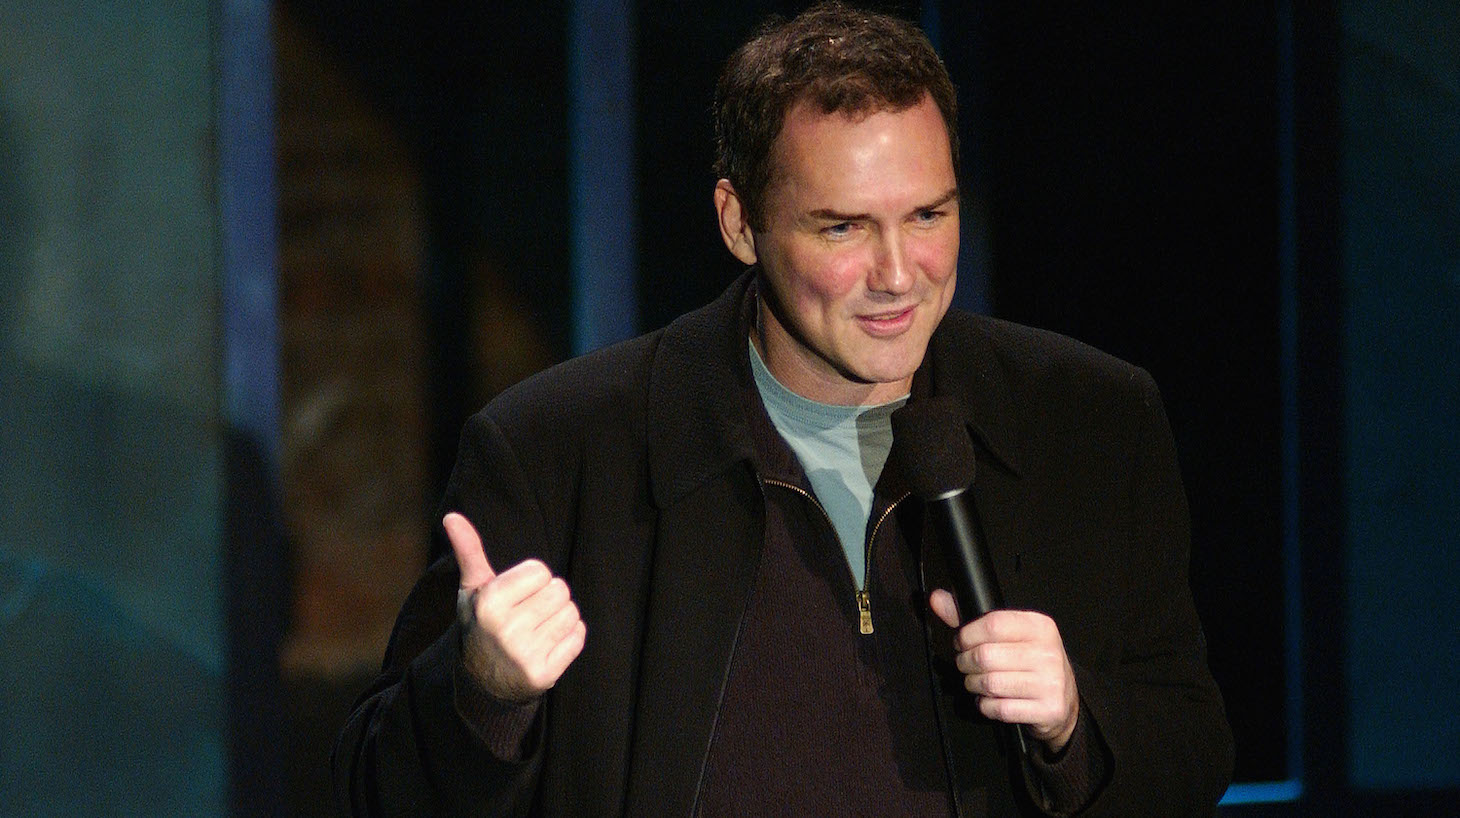 ASPEN - FEBRUARY 28: Norm MacDonald performs during the US Comedy Arts Festival at the historic Wheeler Opera House February 28, 2003 in Aspen, Colorado. (Photo by Michael Brands/Getty Images)